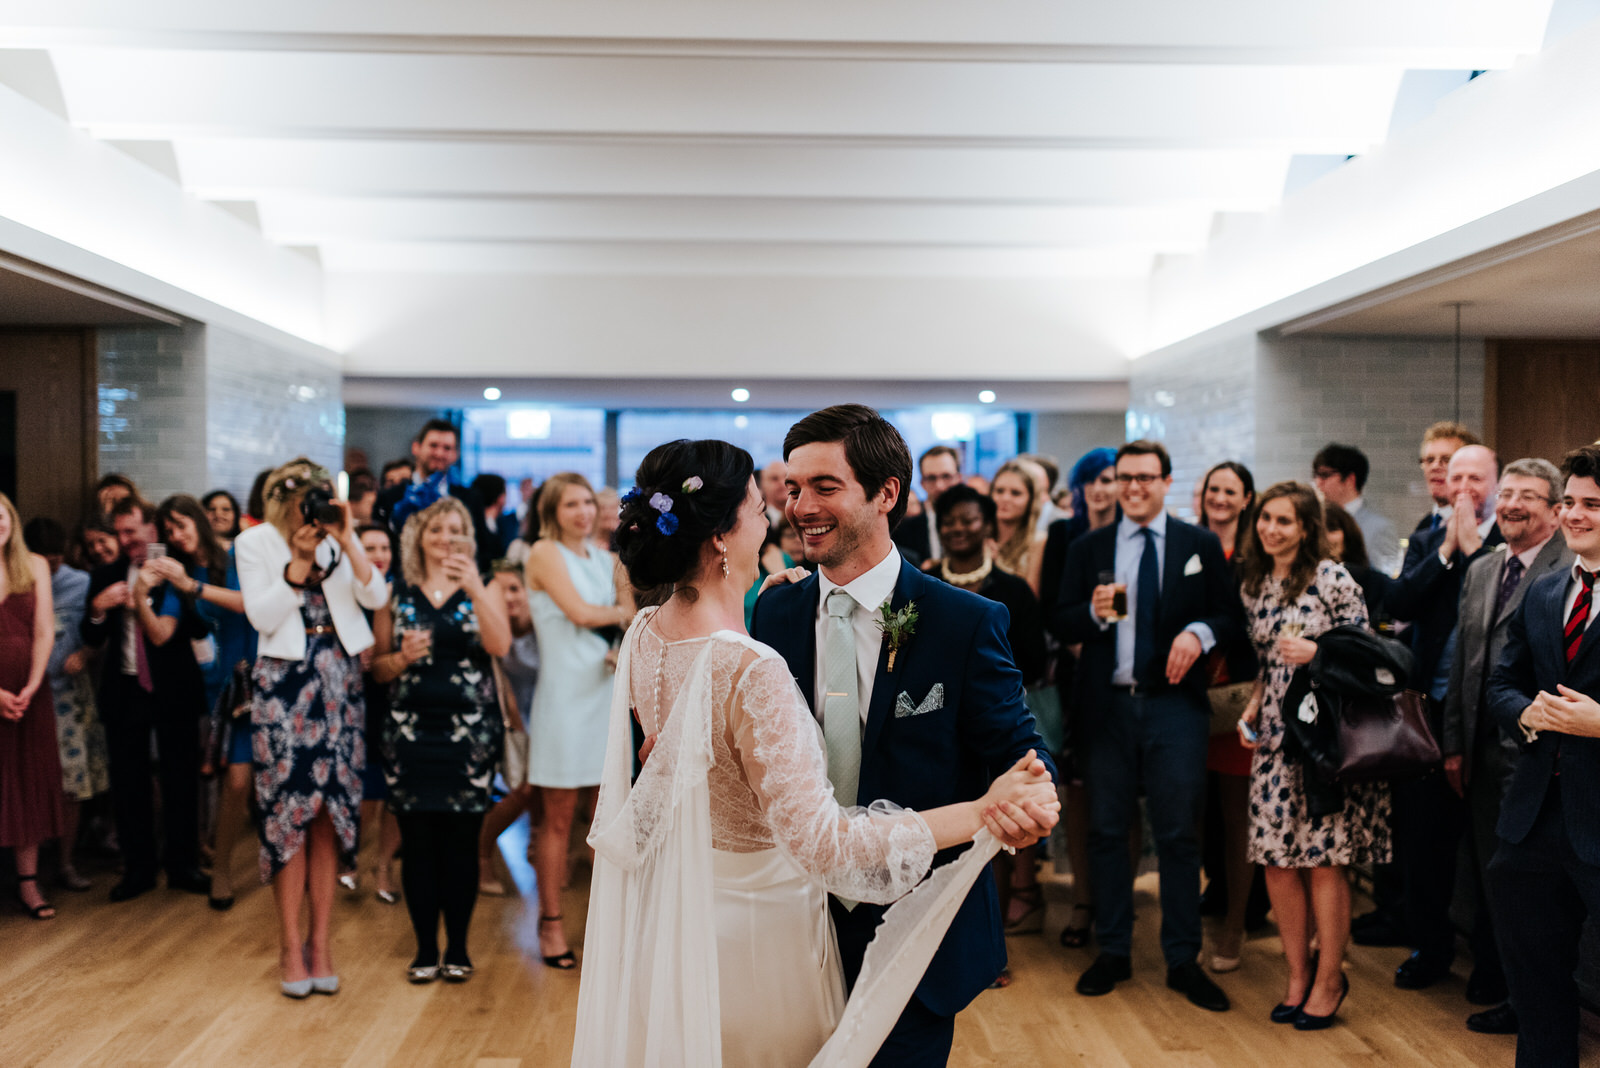 Bride and groom have their first dance in front of guests at Wes